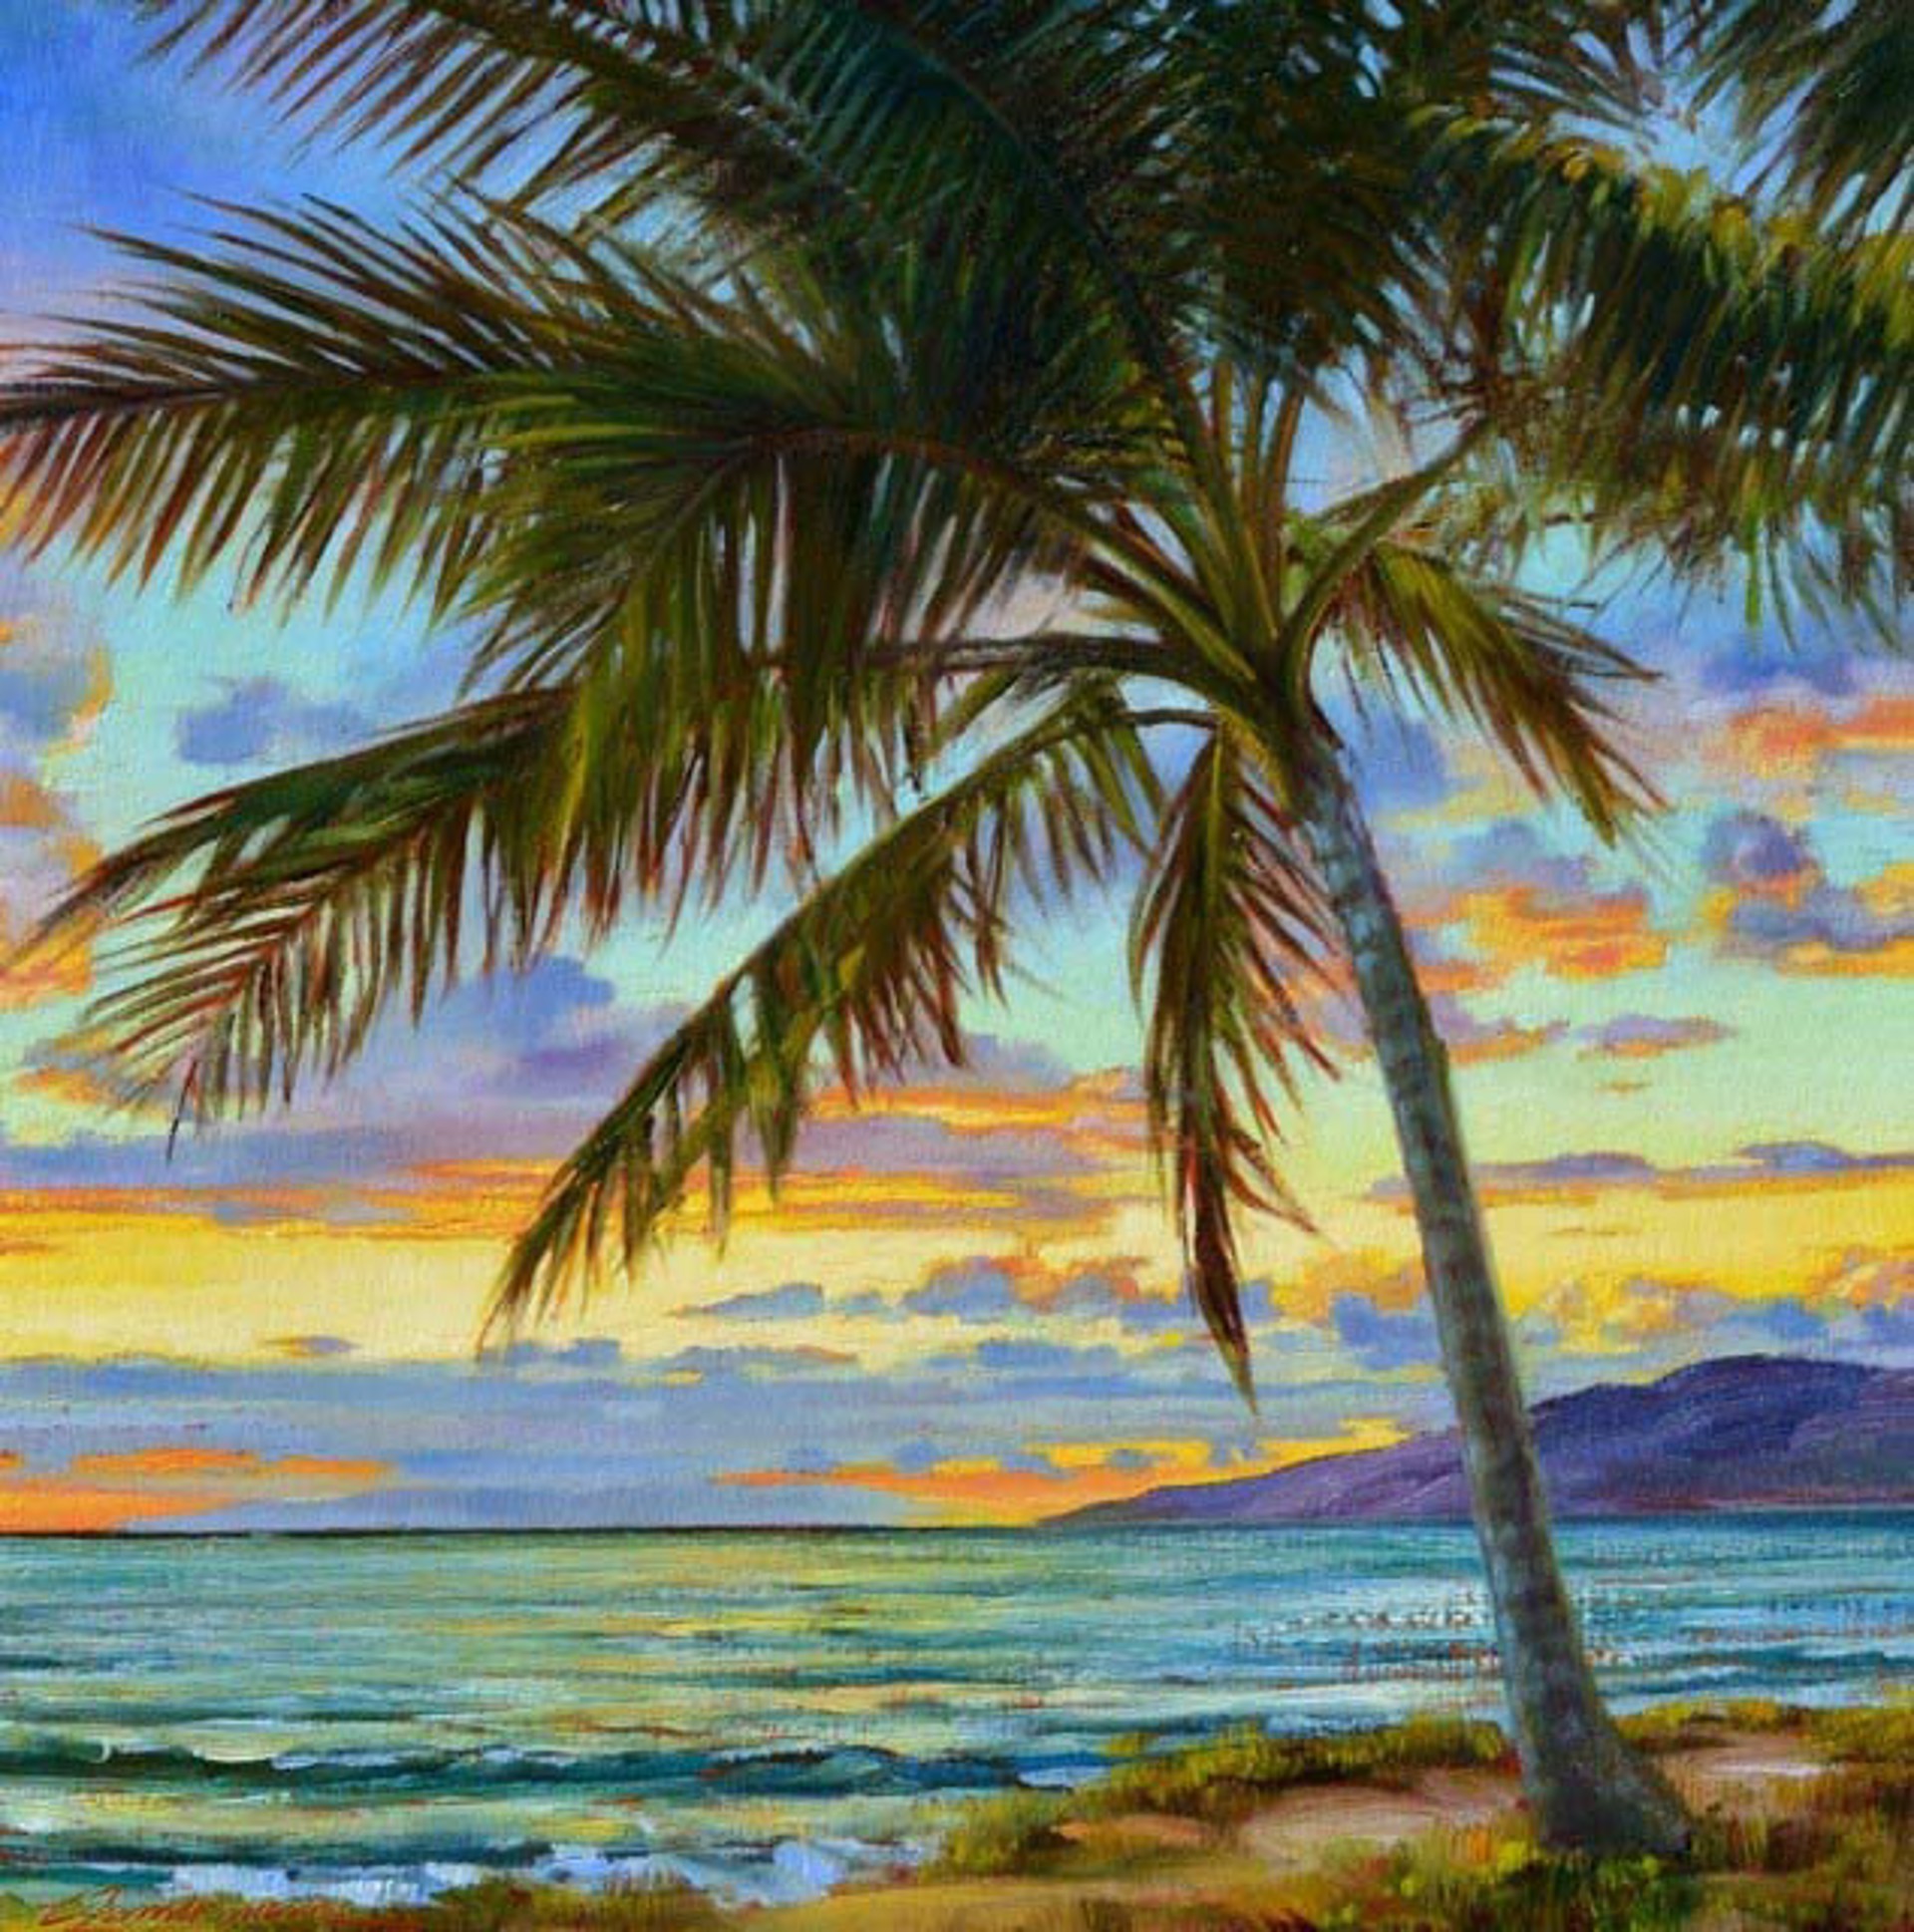 Island Sunset Dream - SOLD by Commission Possibilities / Previously Sold ZX